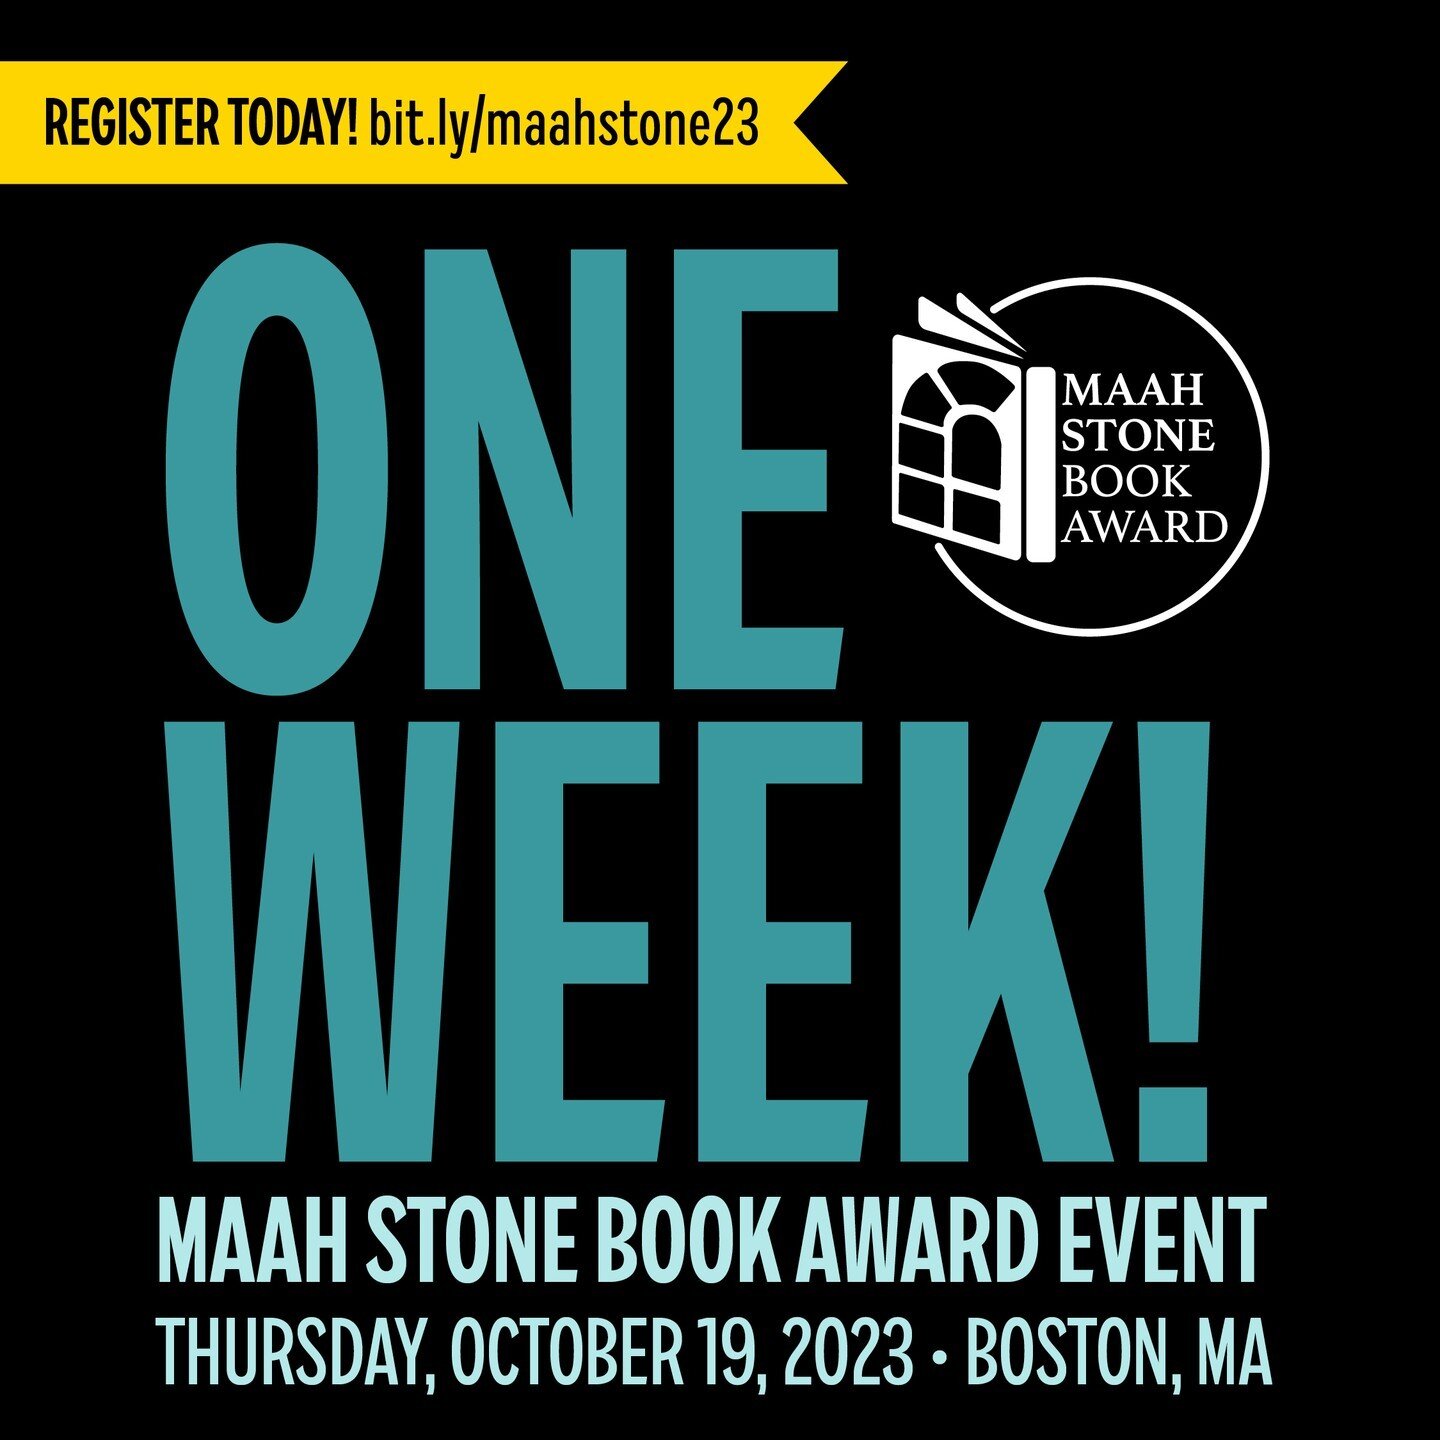 What 'cha waiting for??? Register today and be there next week! bit.ly/maahstone23. #MAAHStone2023